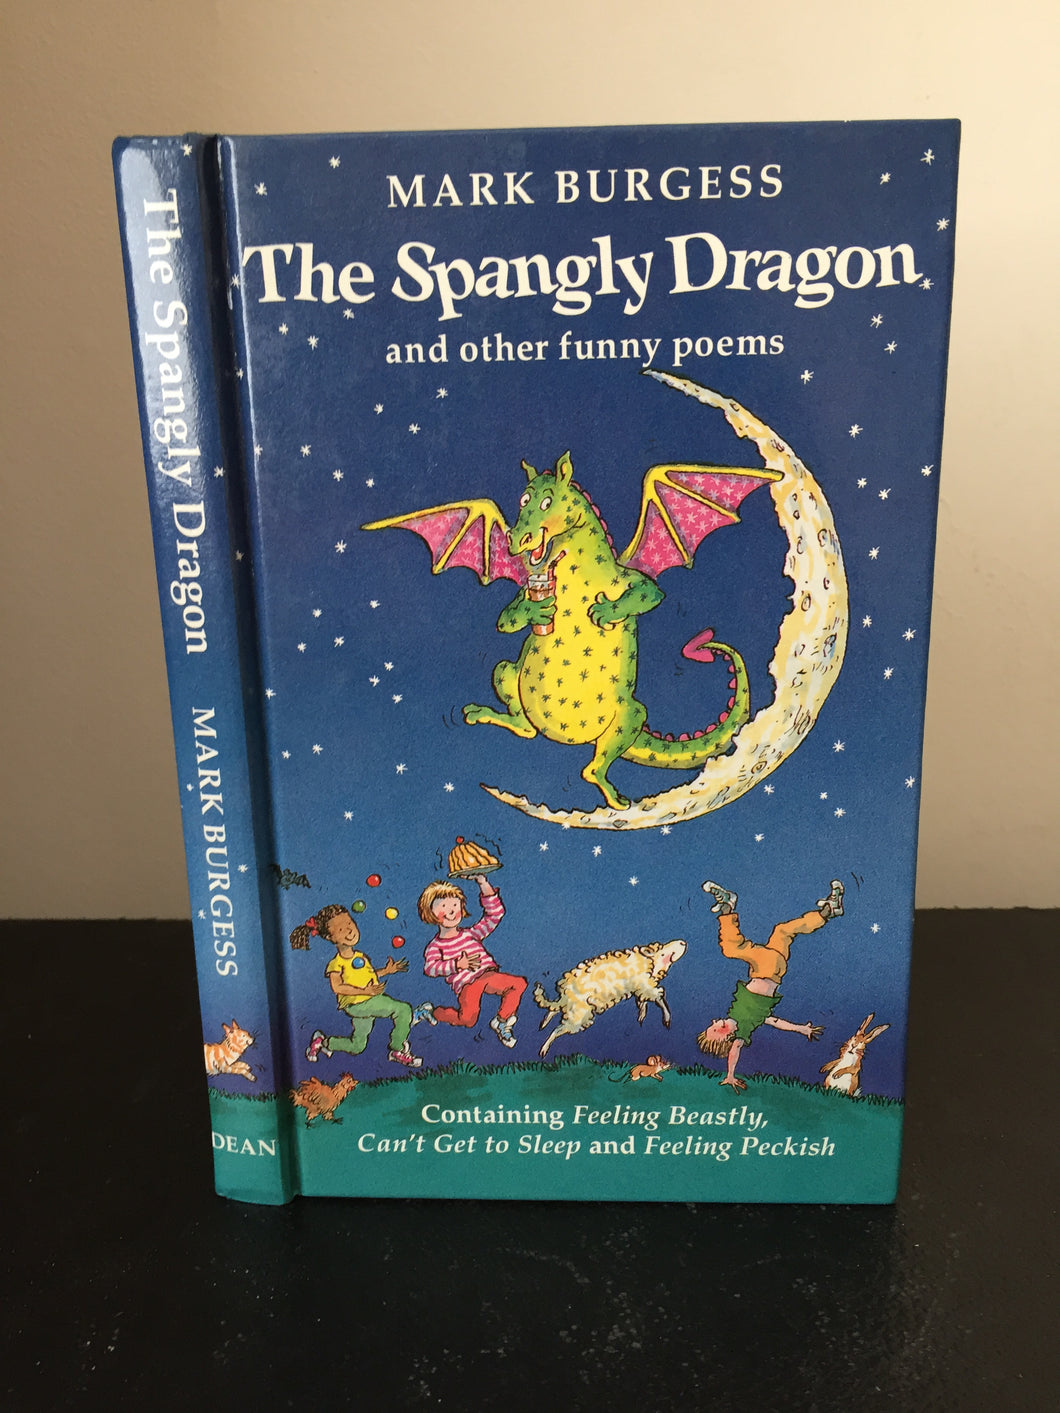 The Spangly Dragon and other funny poems